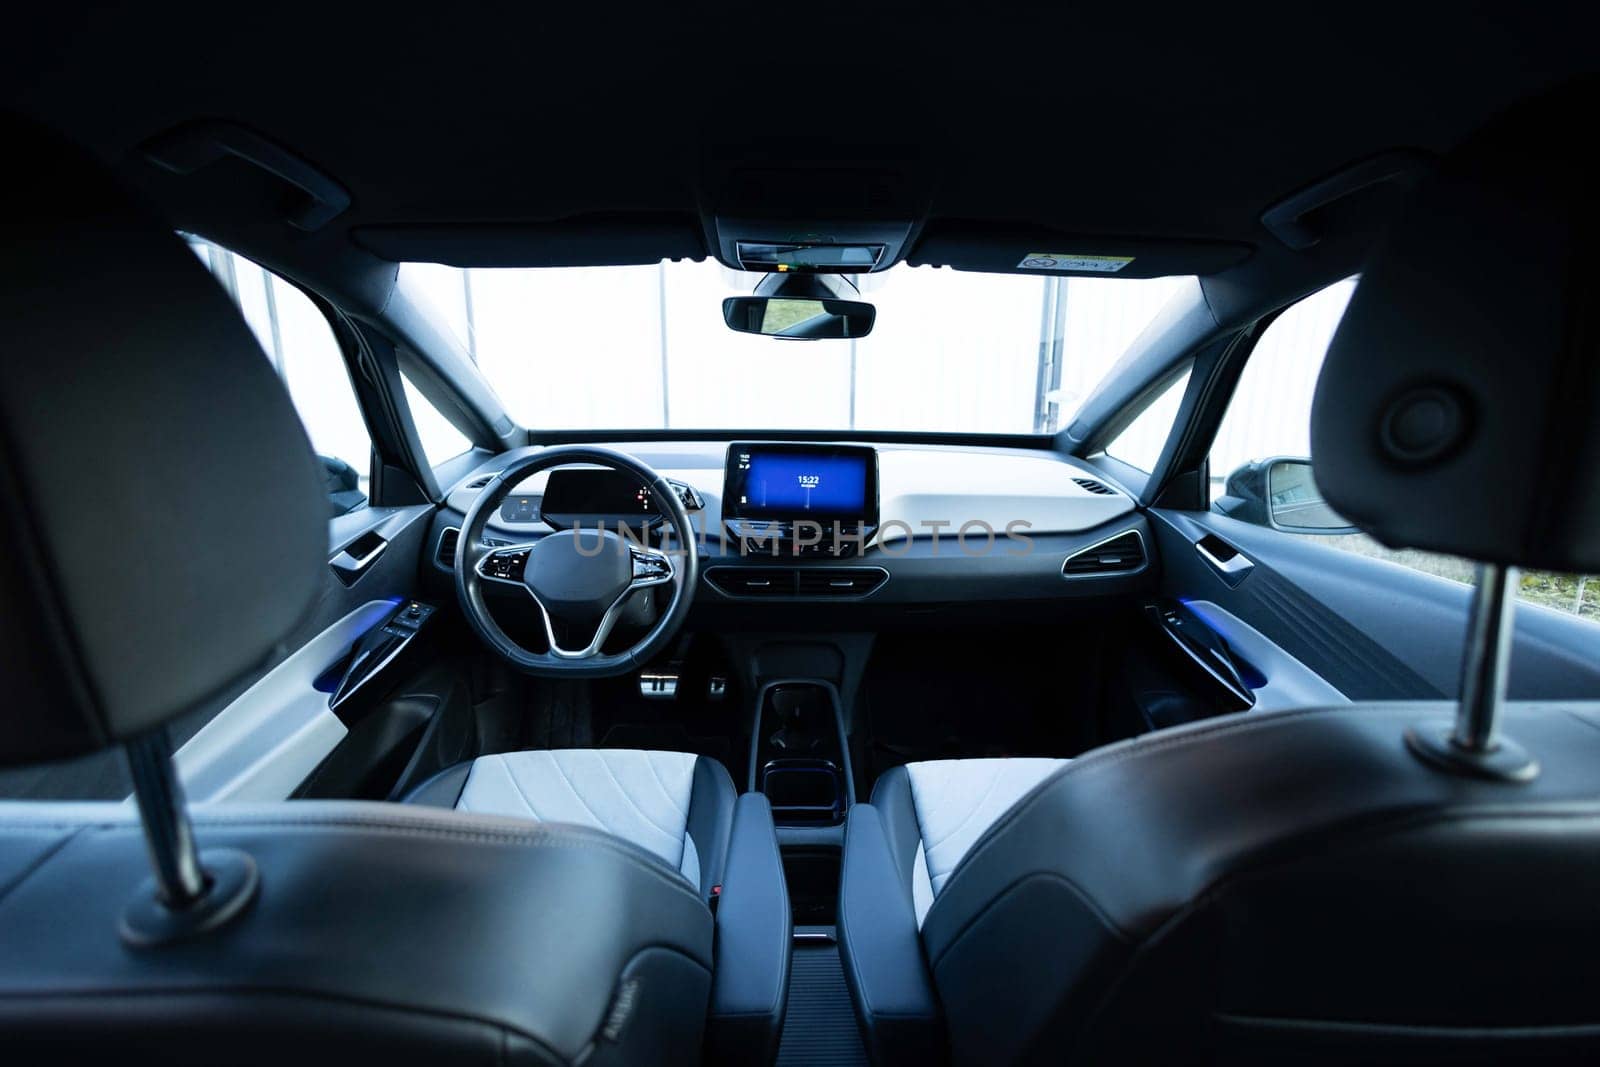 Electric car interior details adjustments. Inside car interior with front seats, driver and passenger, textile, multimedia, windows, console, gear shift, electric buttons, digital speedometer.